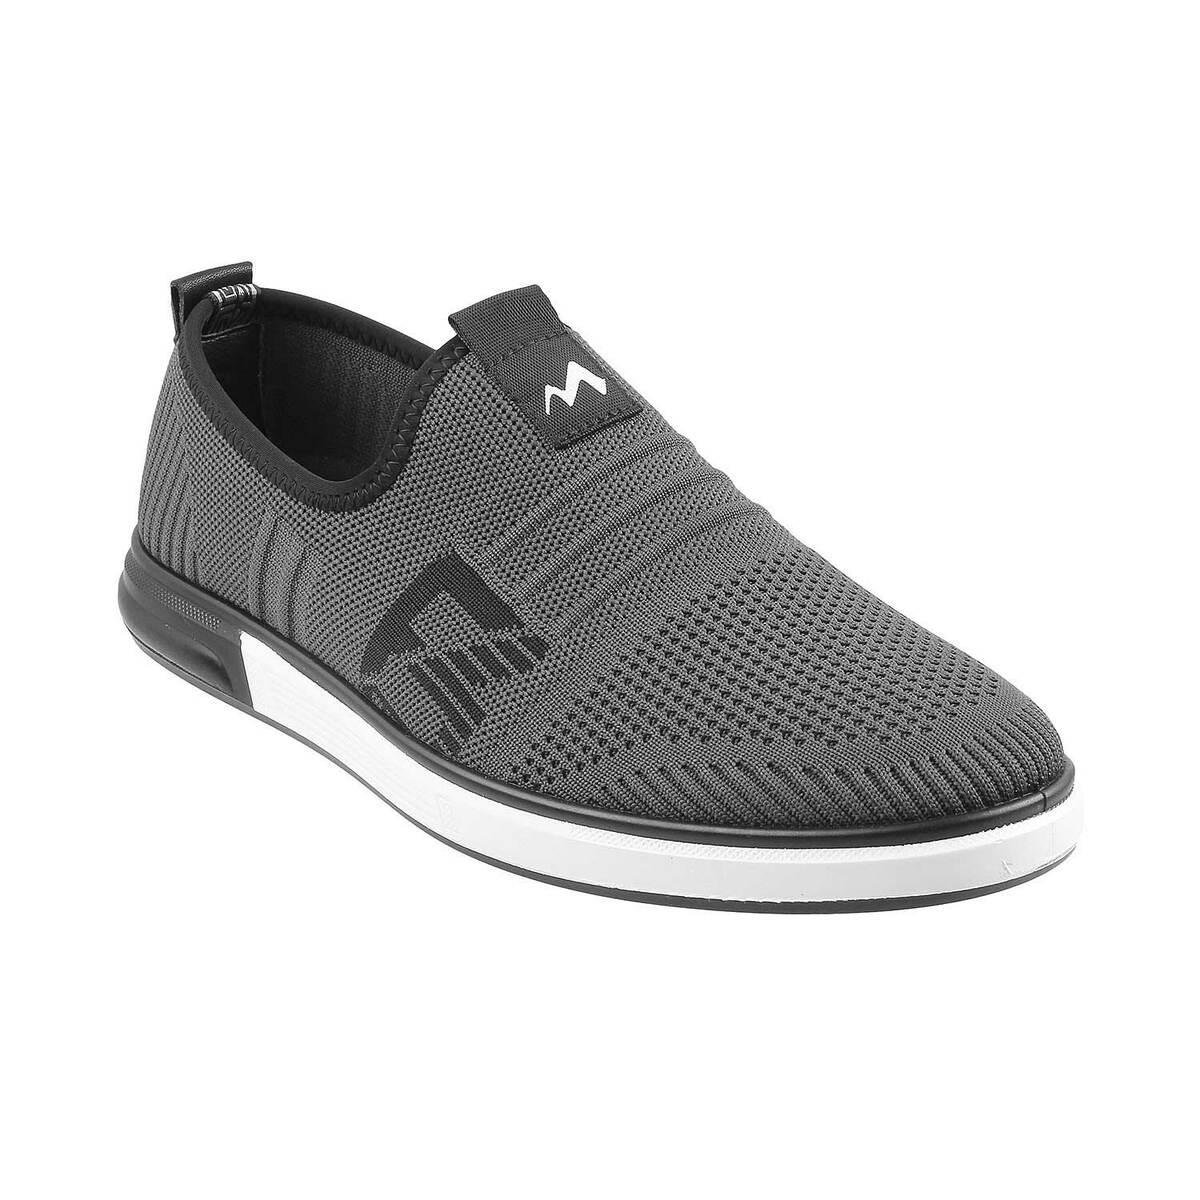 Buy Casual Shoes for Men | Flat Shoes for Men in Lowest Price